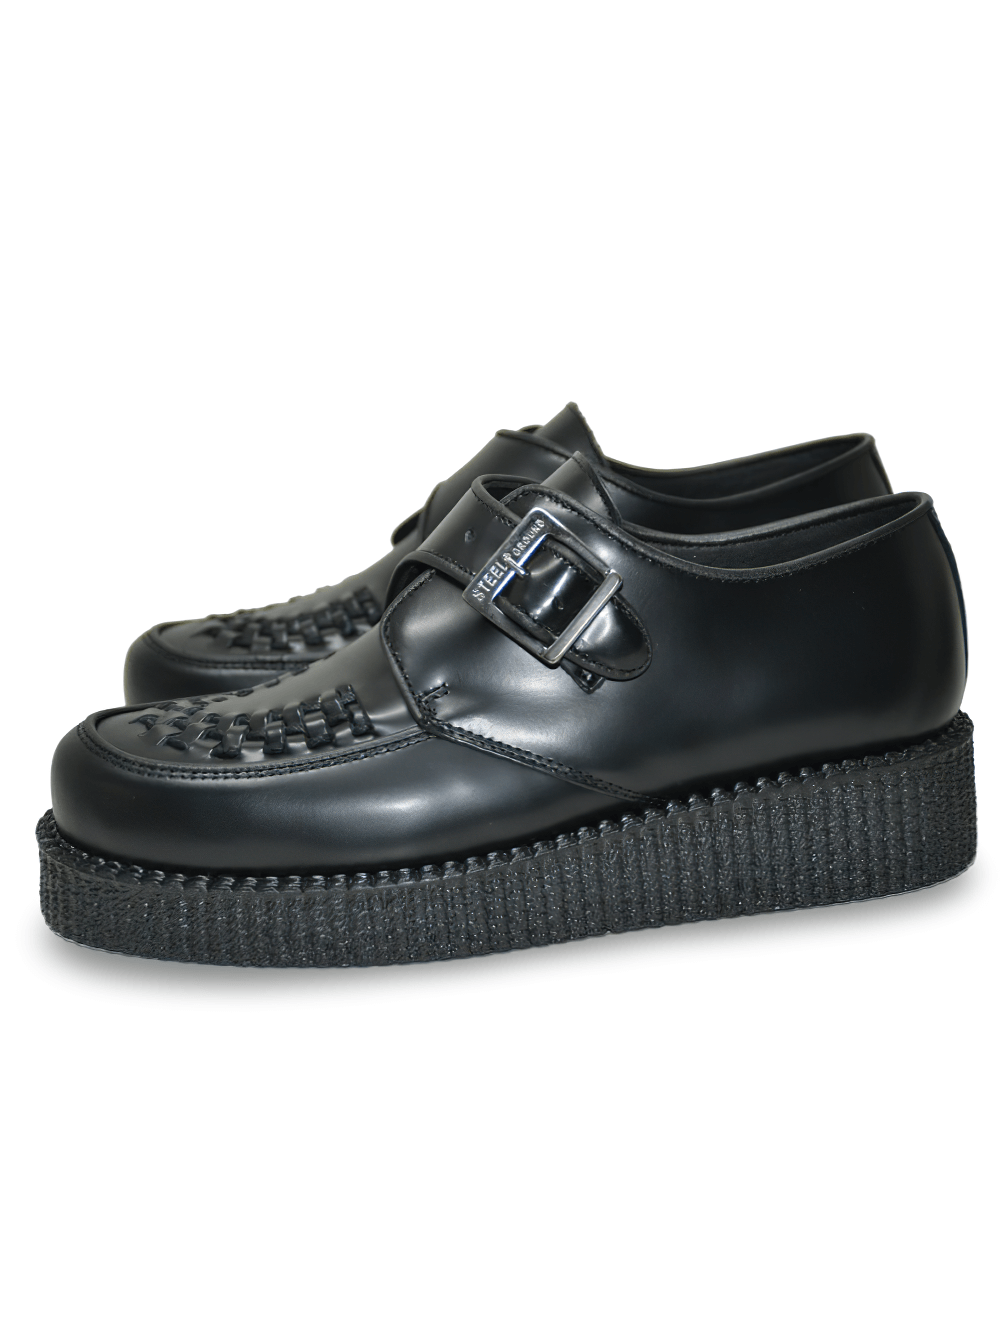 Urban Chic Black Leather Creepers with Rubber Sole